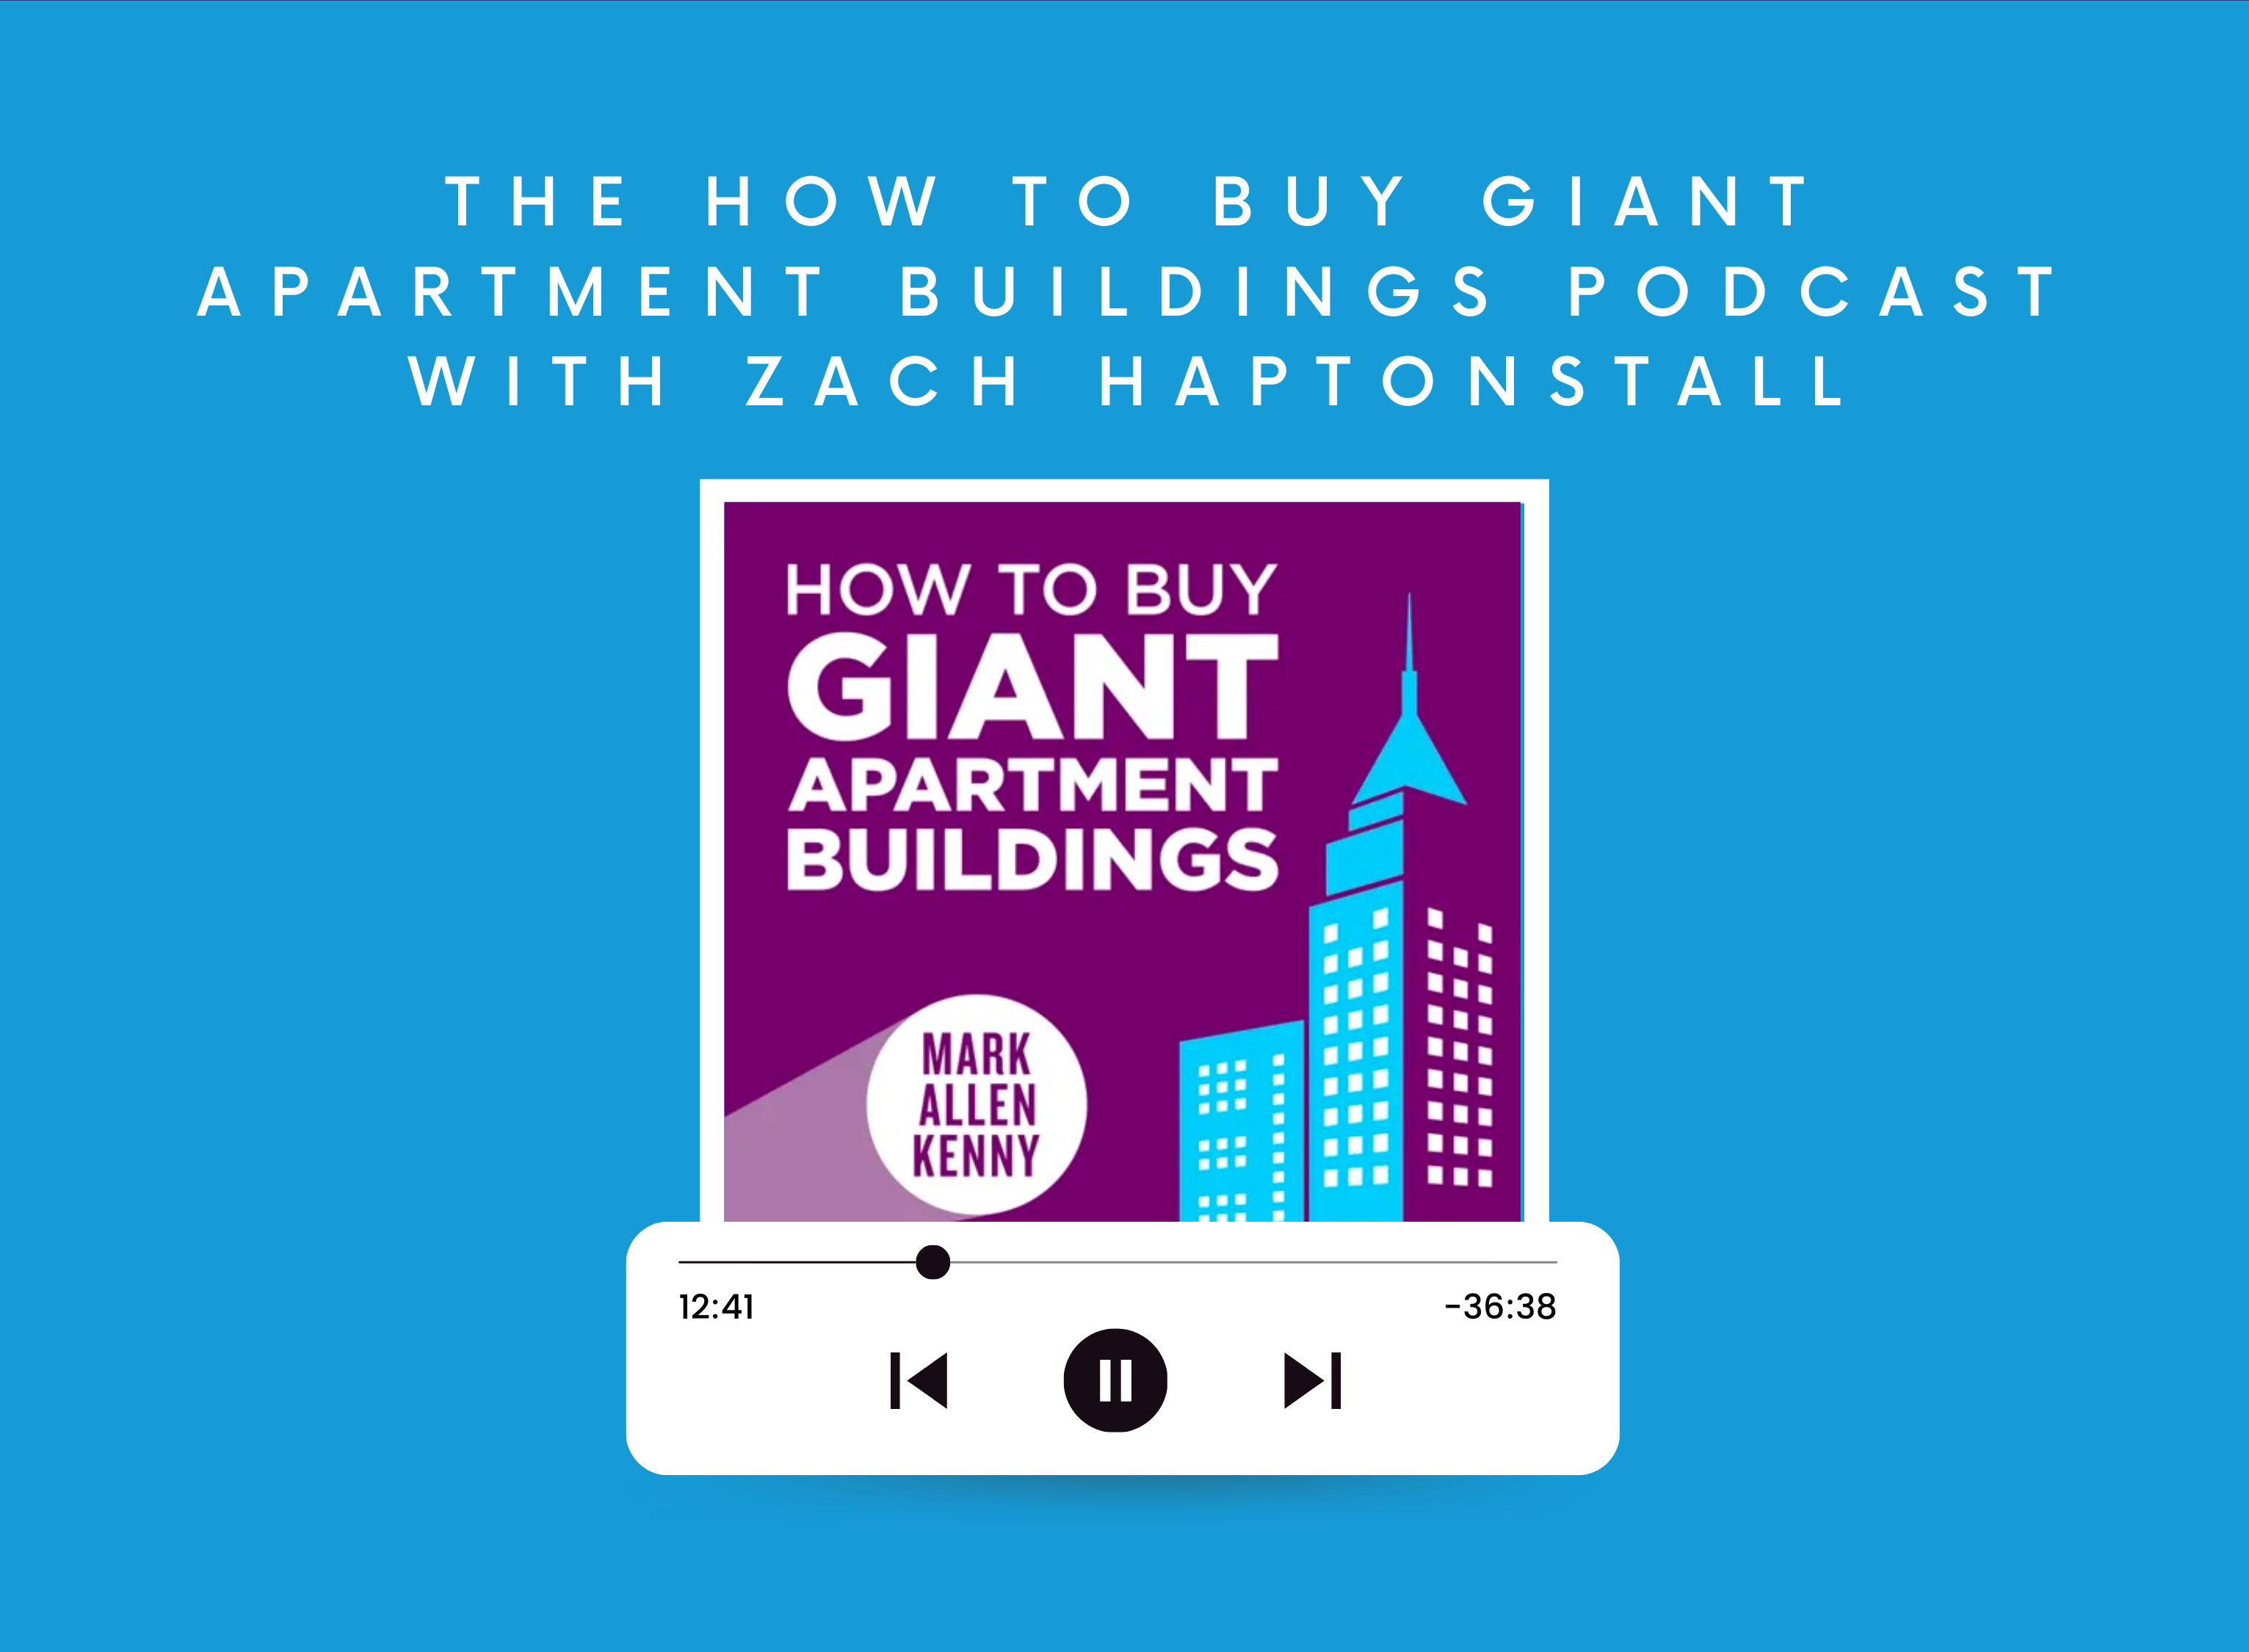 The How to Buy Giant Apartment Buildings Podcast